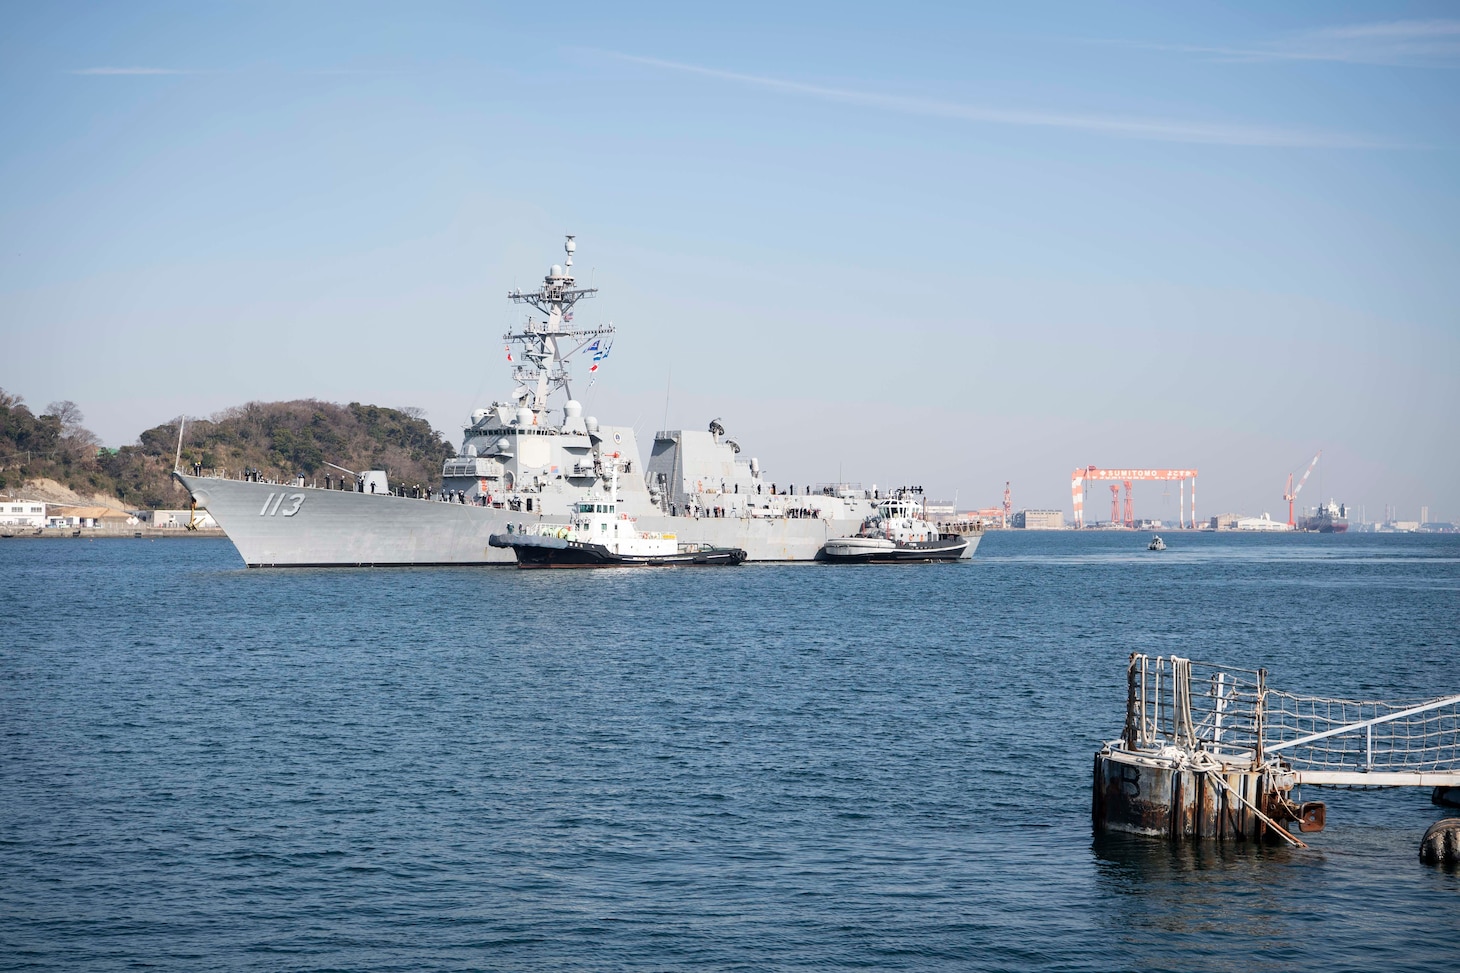 The Arleigh Burke-class guided-missile destroyer USS John Finn (DDG 113) arrives at Commander Fleet Activities Yokosuka (CFAY). Finn arrives from Naval Base San Diego to CFAY, becoming the latest forward-deployed asset in the U.S. 7th Fleet. For 75 years, CFAY has provided, maintained, and operated base facilities and services in support of the U.S. 7th Fleet's forward-deployed naval forces, tenant commands, and thousands of military and civilian personnel and their families. (U.S. Navy photo by Mass Communication Specialist 1st Class Kaleb J. Sarten)